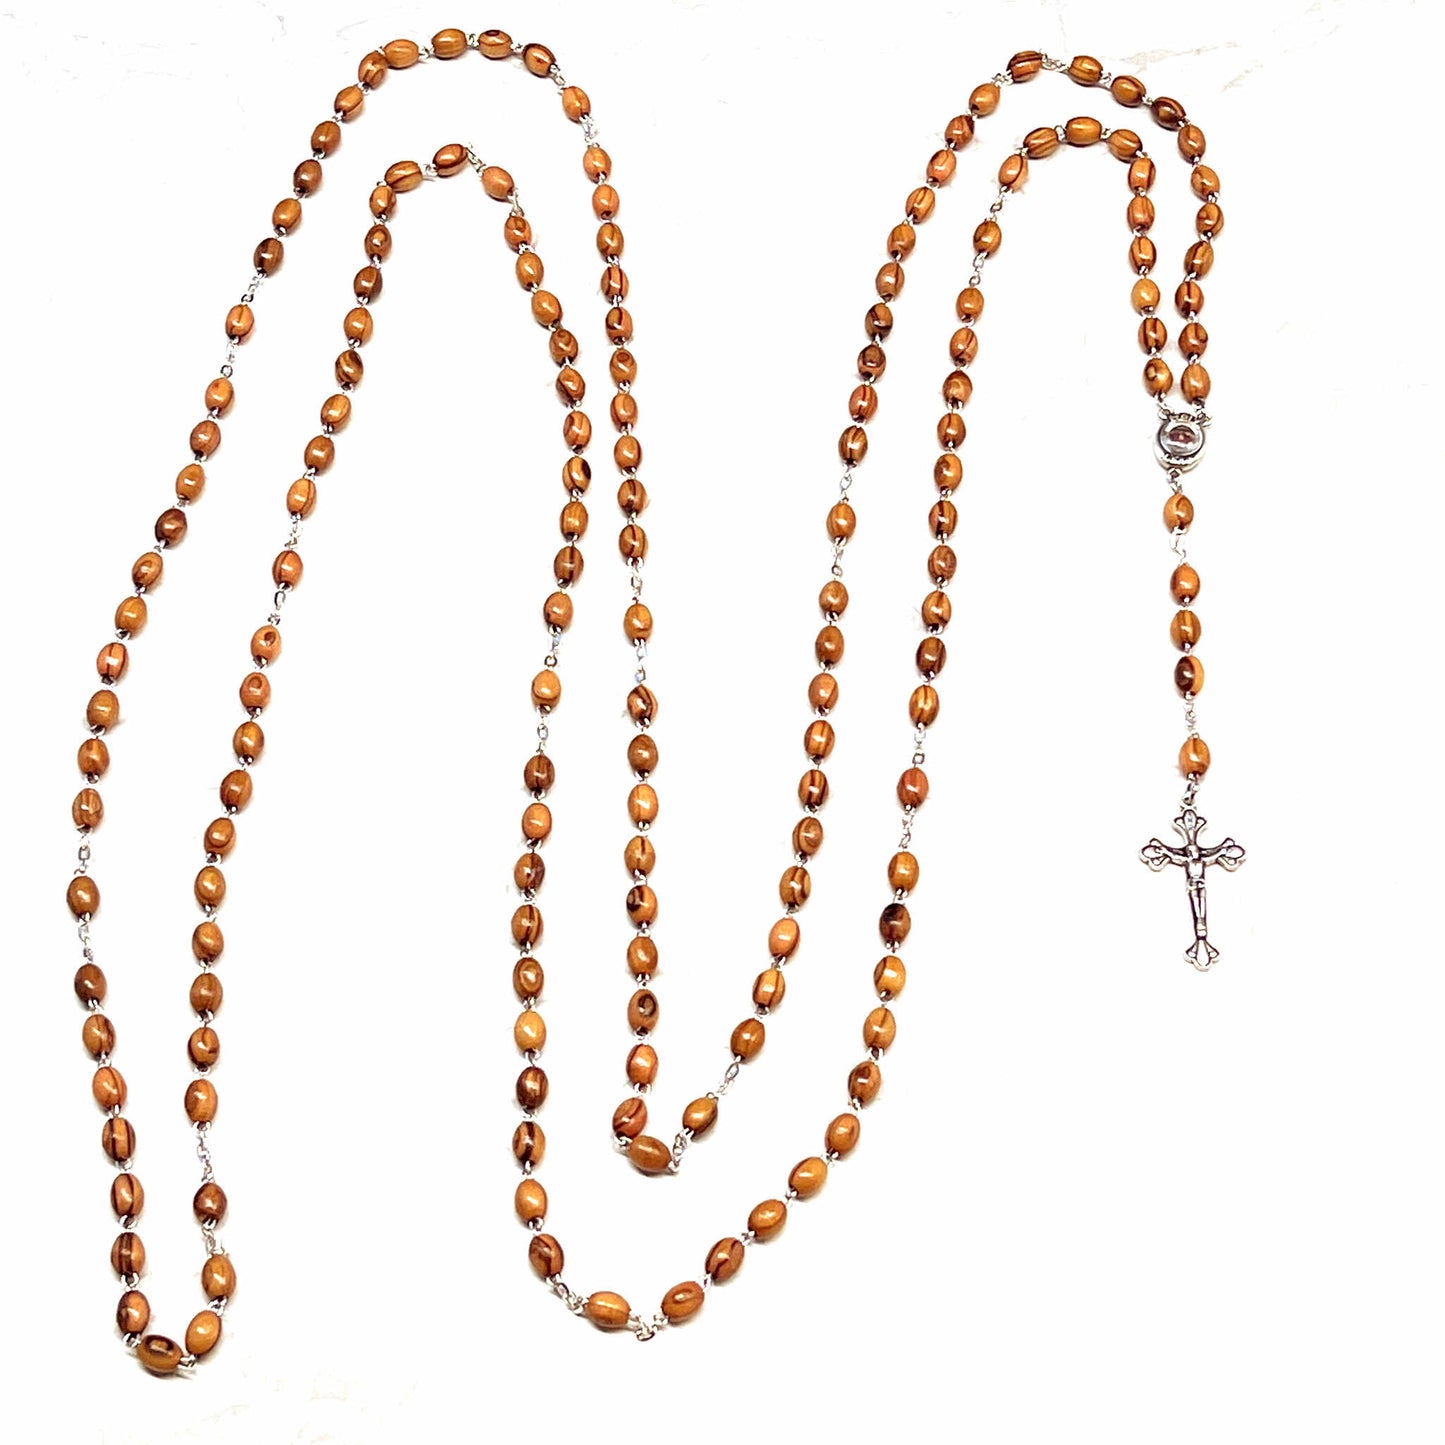 15 Decade Rosary, Wooden Beads from Holy Land, Wall Hanging